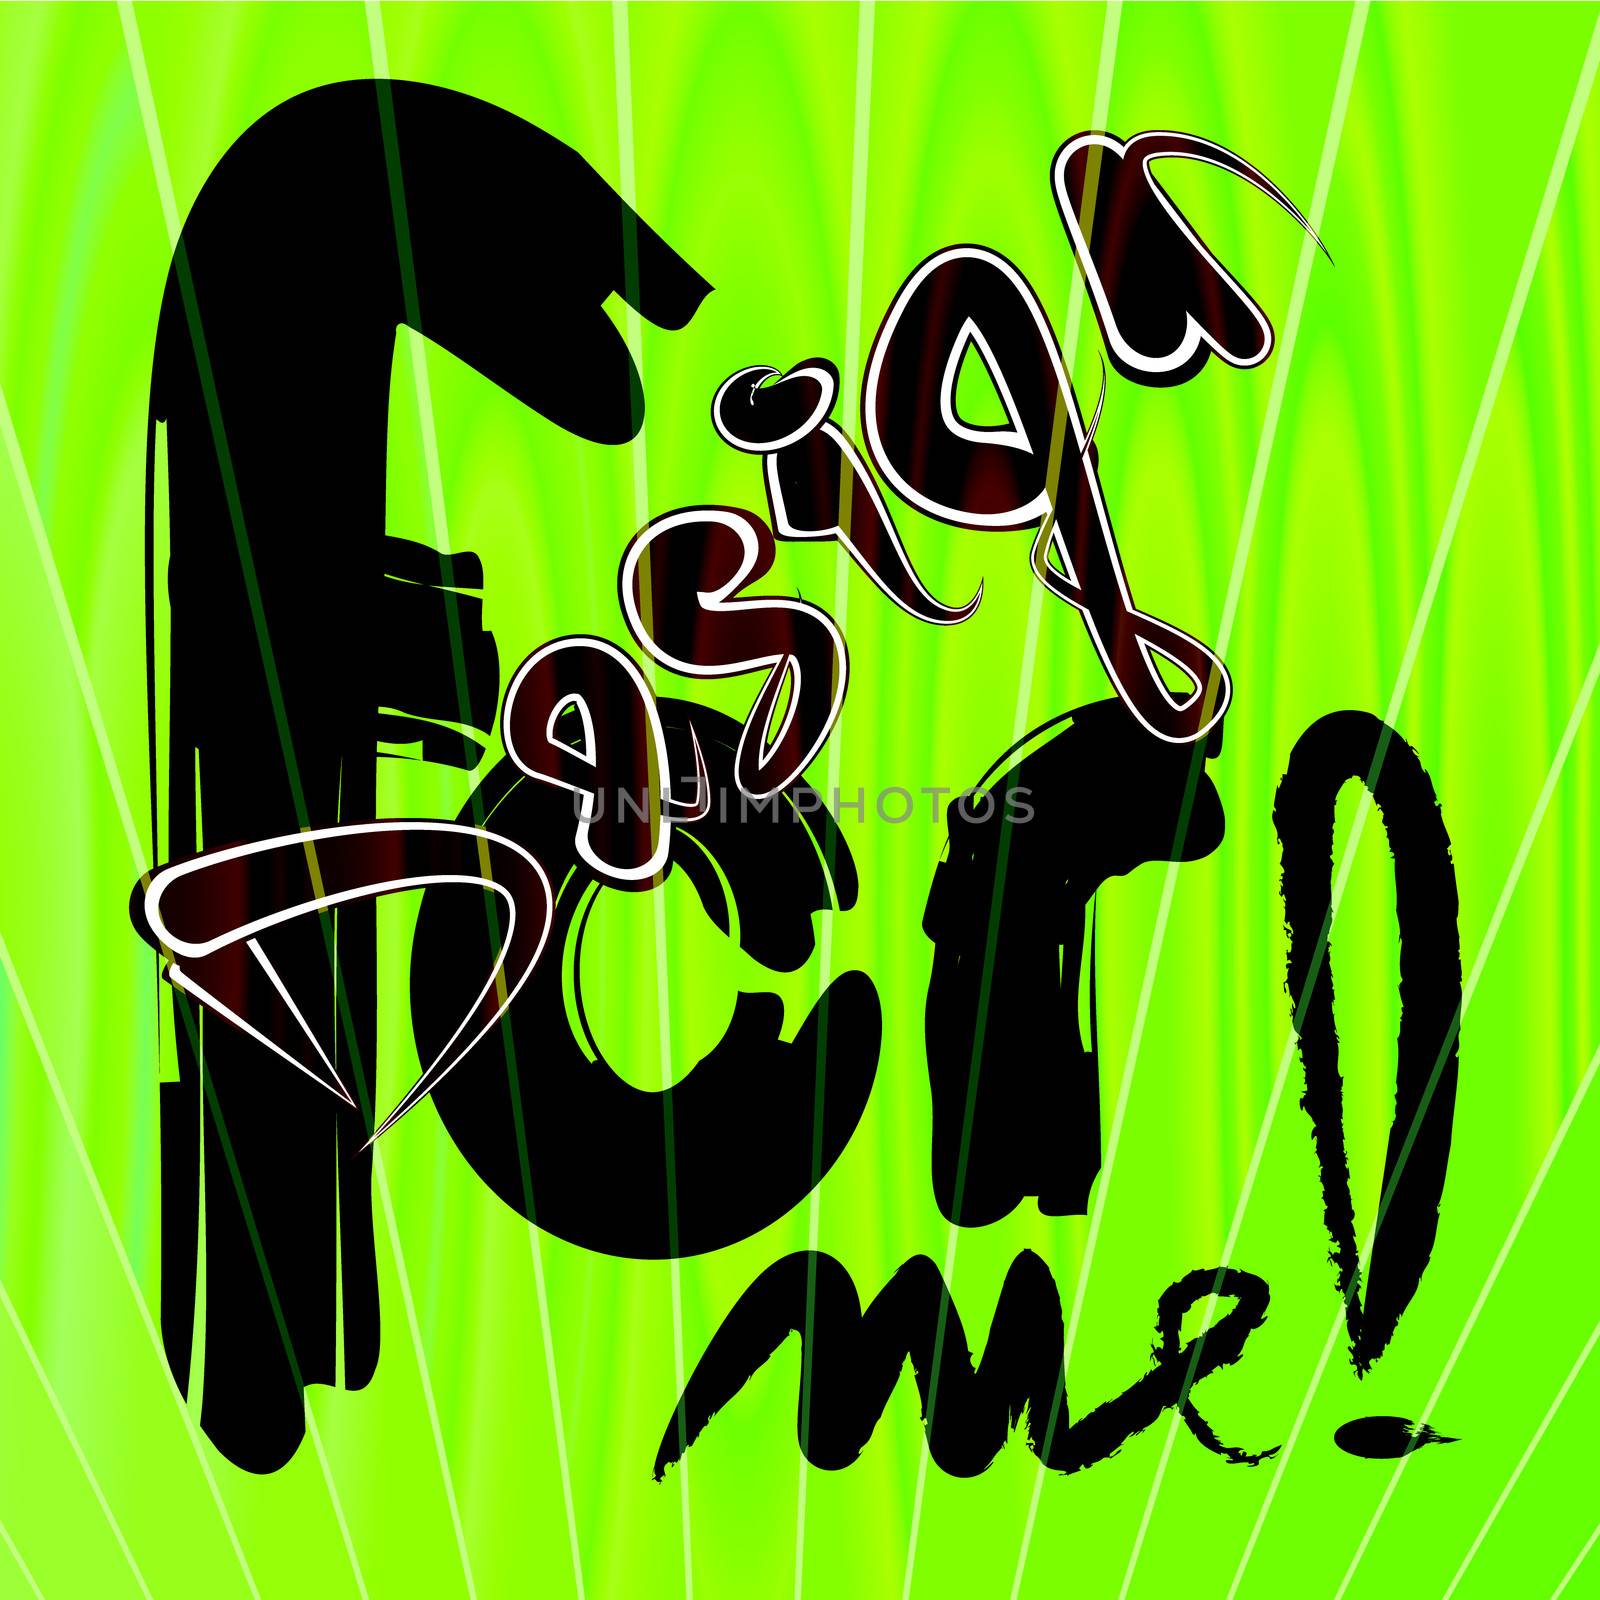 Inscription, Design for me, on abstract green background